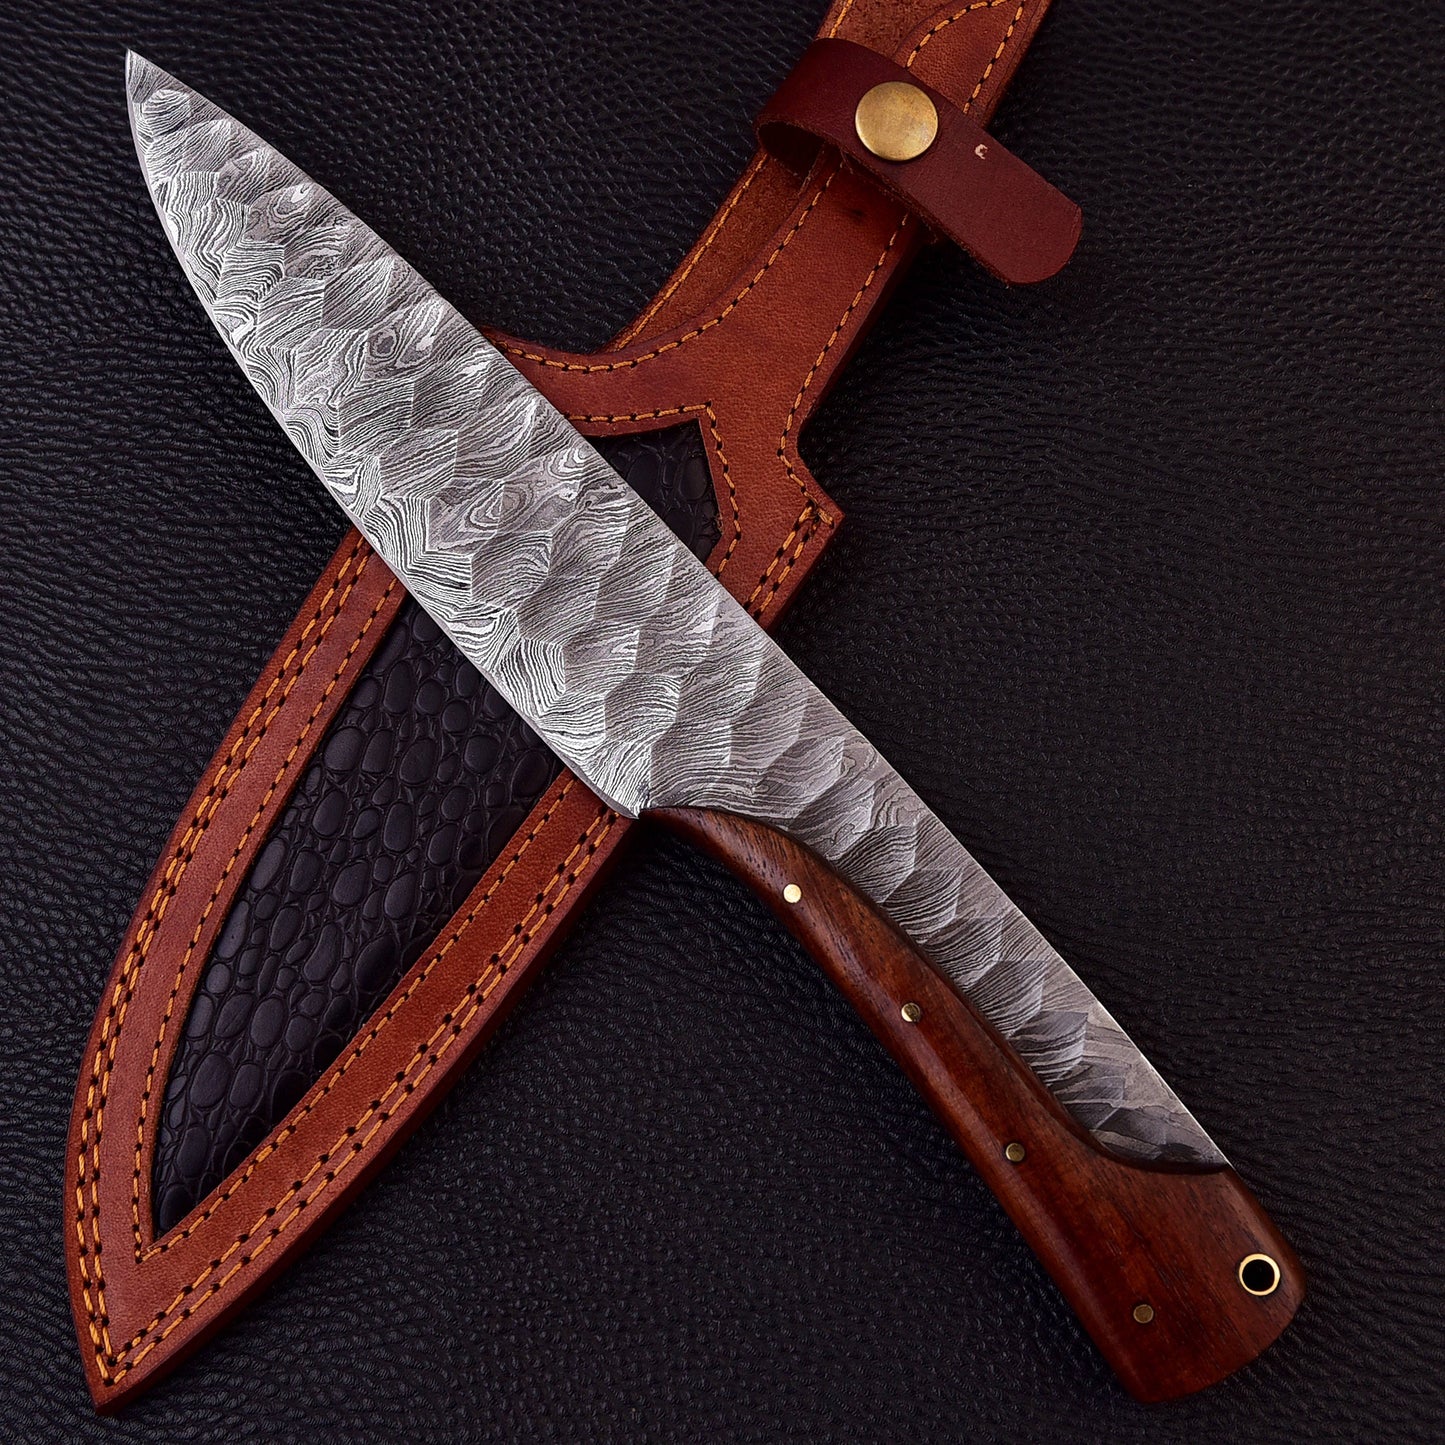 12" Ridged Unique Handle Damascus Steel Bowie Knife - Hunting or Camping Fixed Blade Full-Tang Drop Point Handmade Bowie Gift for Him